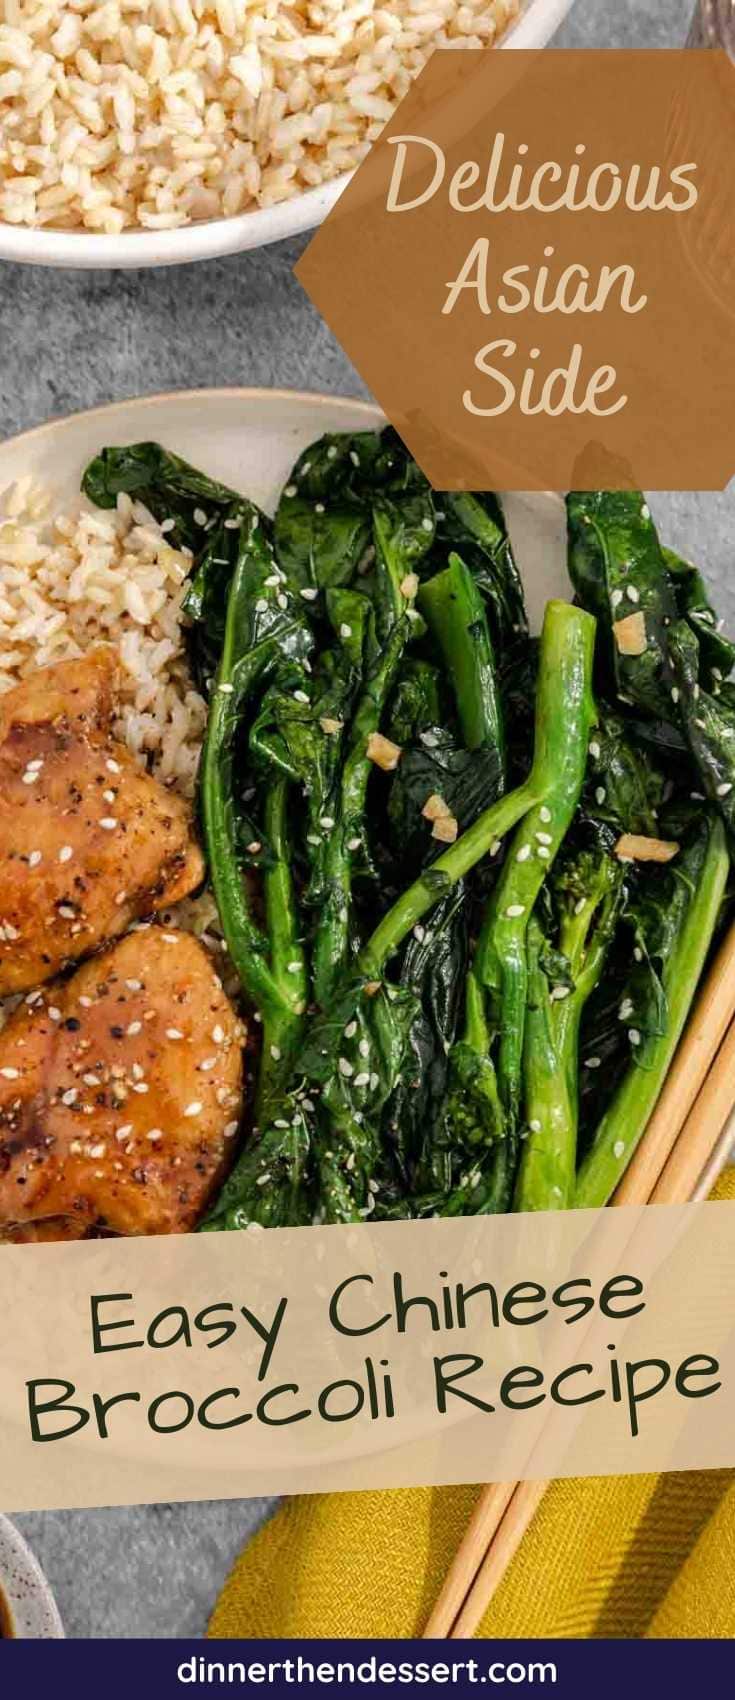 Chinese Broccoli plated with chicken thighs and brown rice. Recipe name across bottom and short description in top right "Delicious Asian Side"